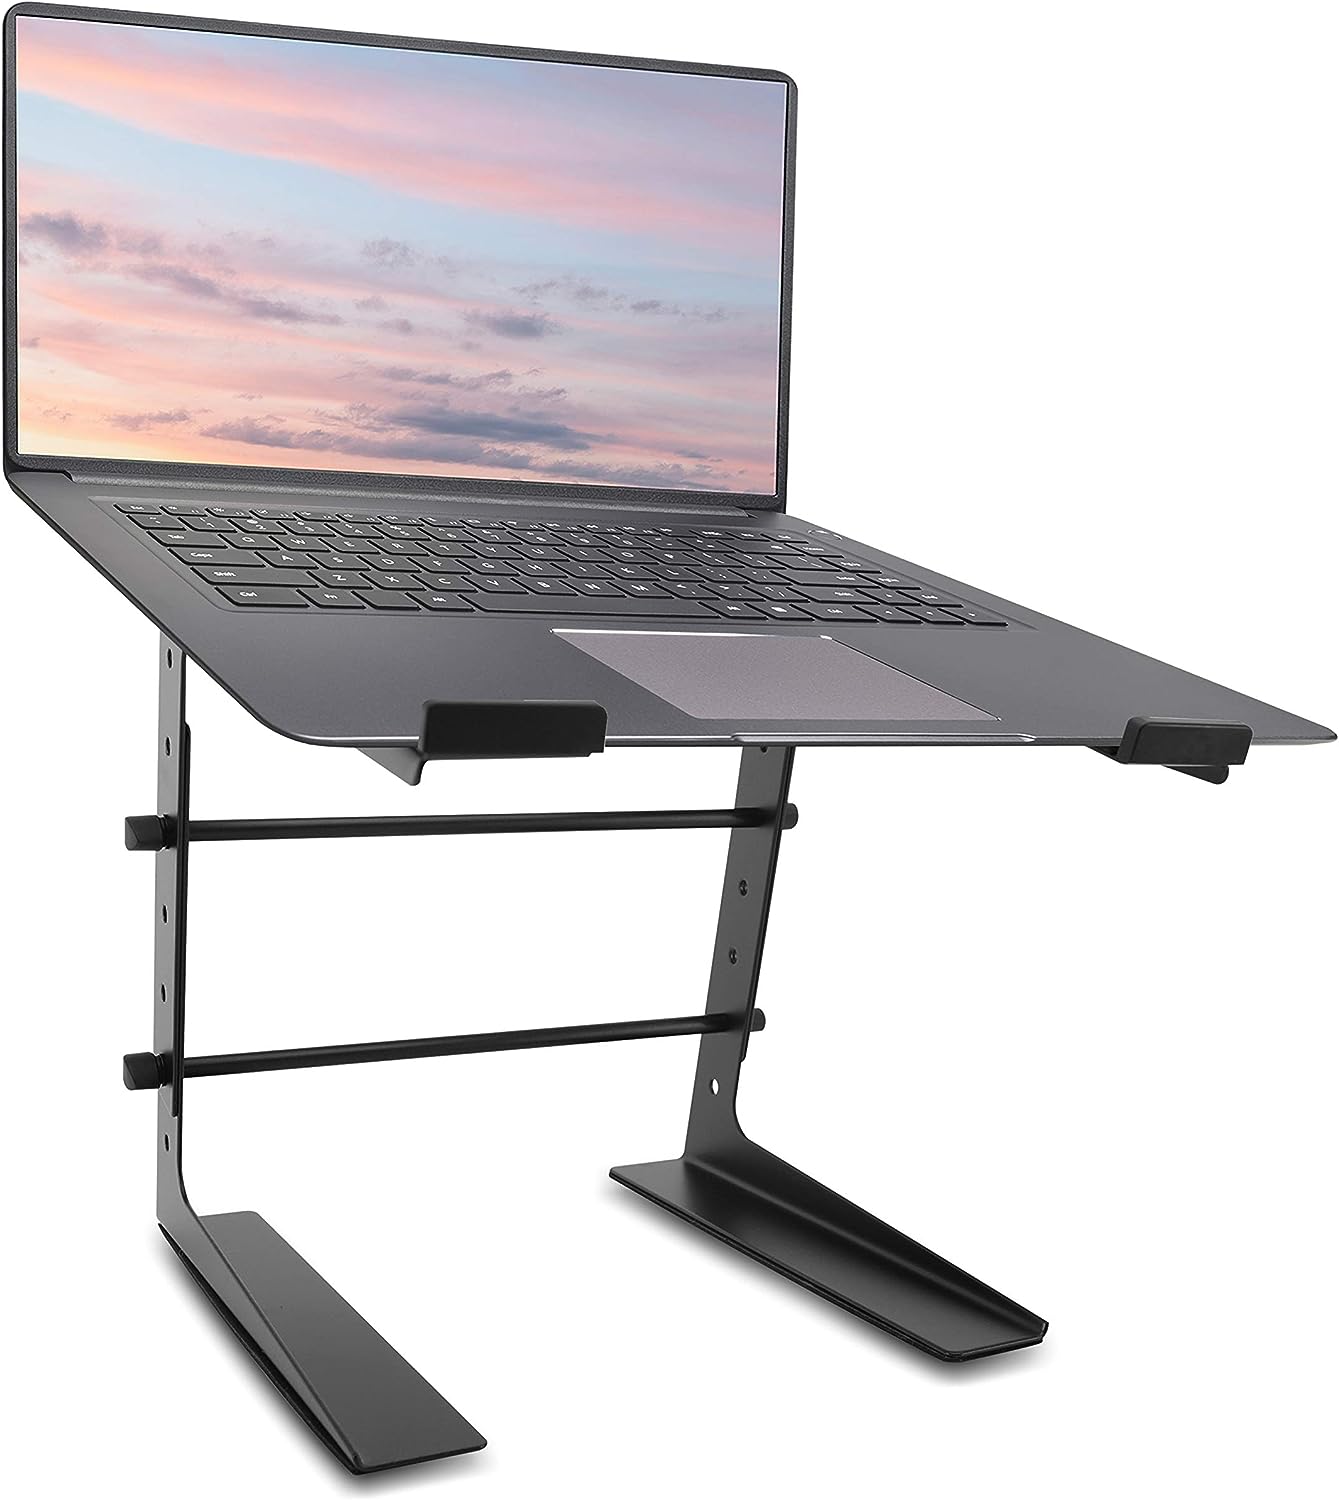 Pyle Portable Adjustable Laptop Stand - 6.3 to 10.9 [...]